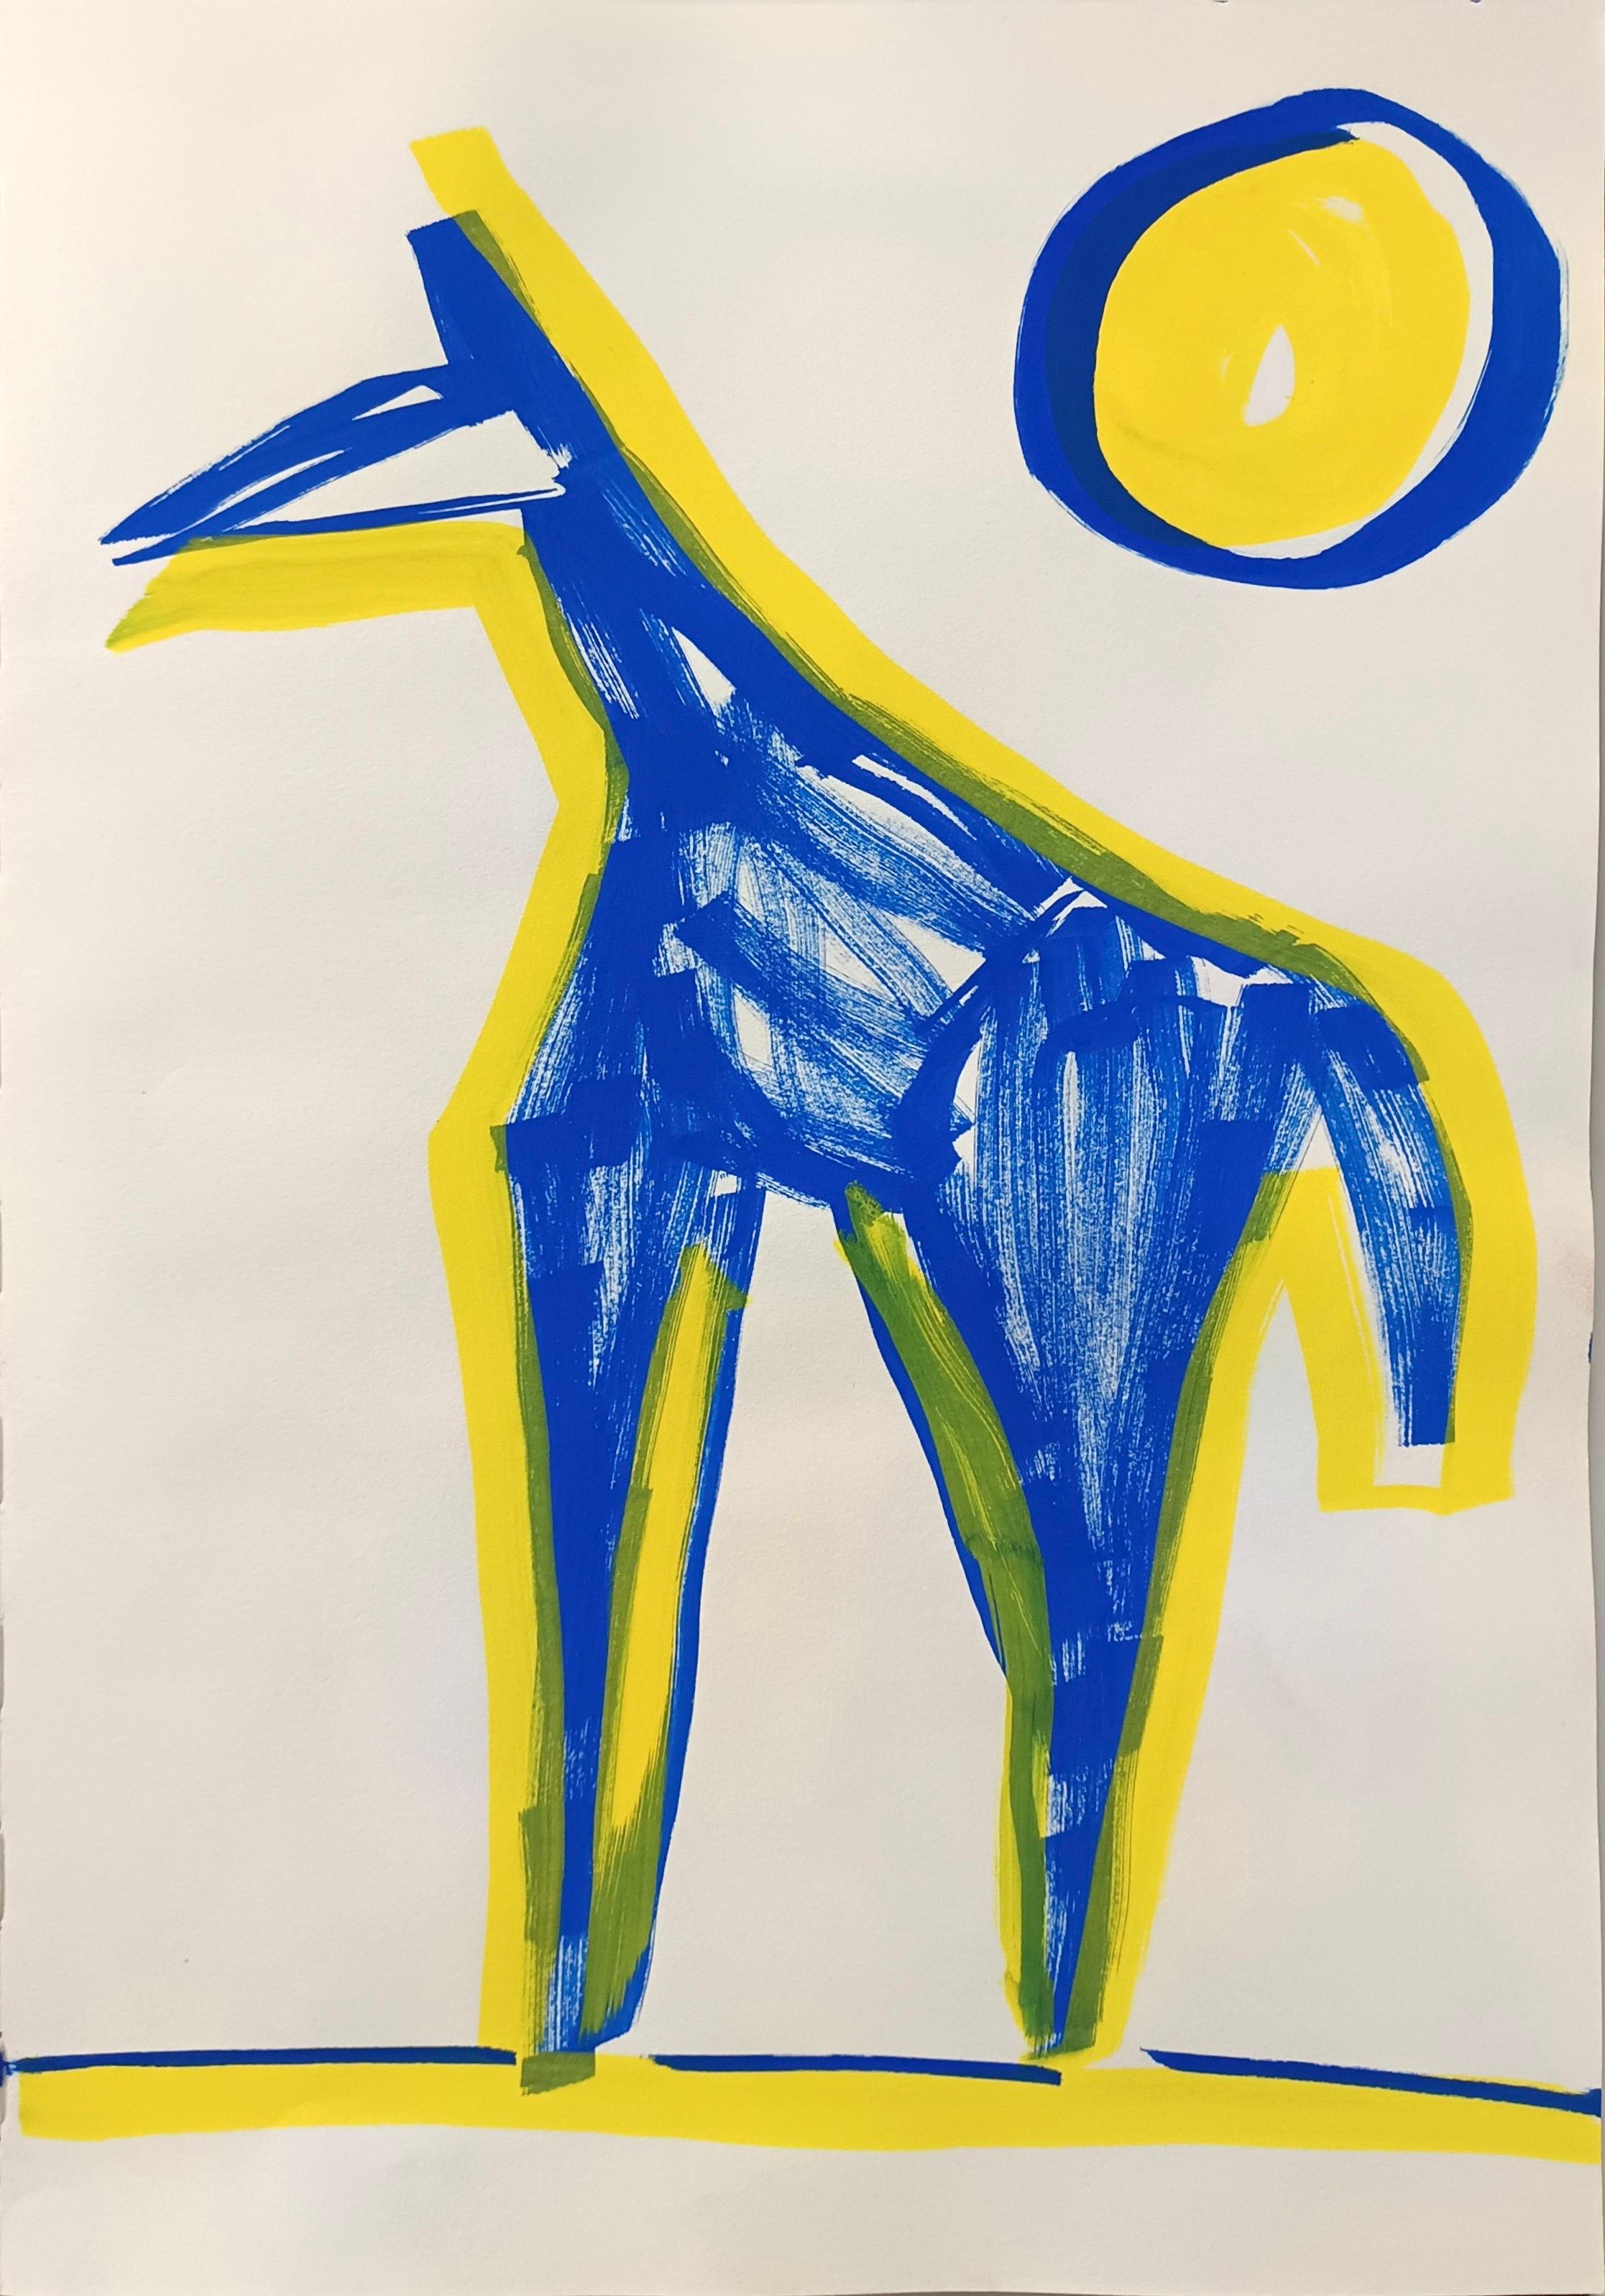 Enzio Wenk Animal Painting - Untitled by E. Wenk, 2020-21 -Blue and Yellow Acrylic on Paper, NeoExpressionism